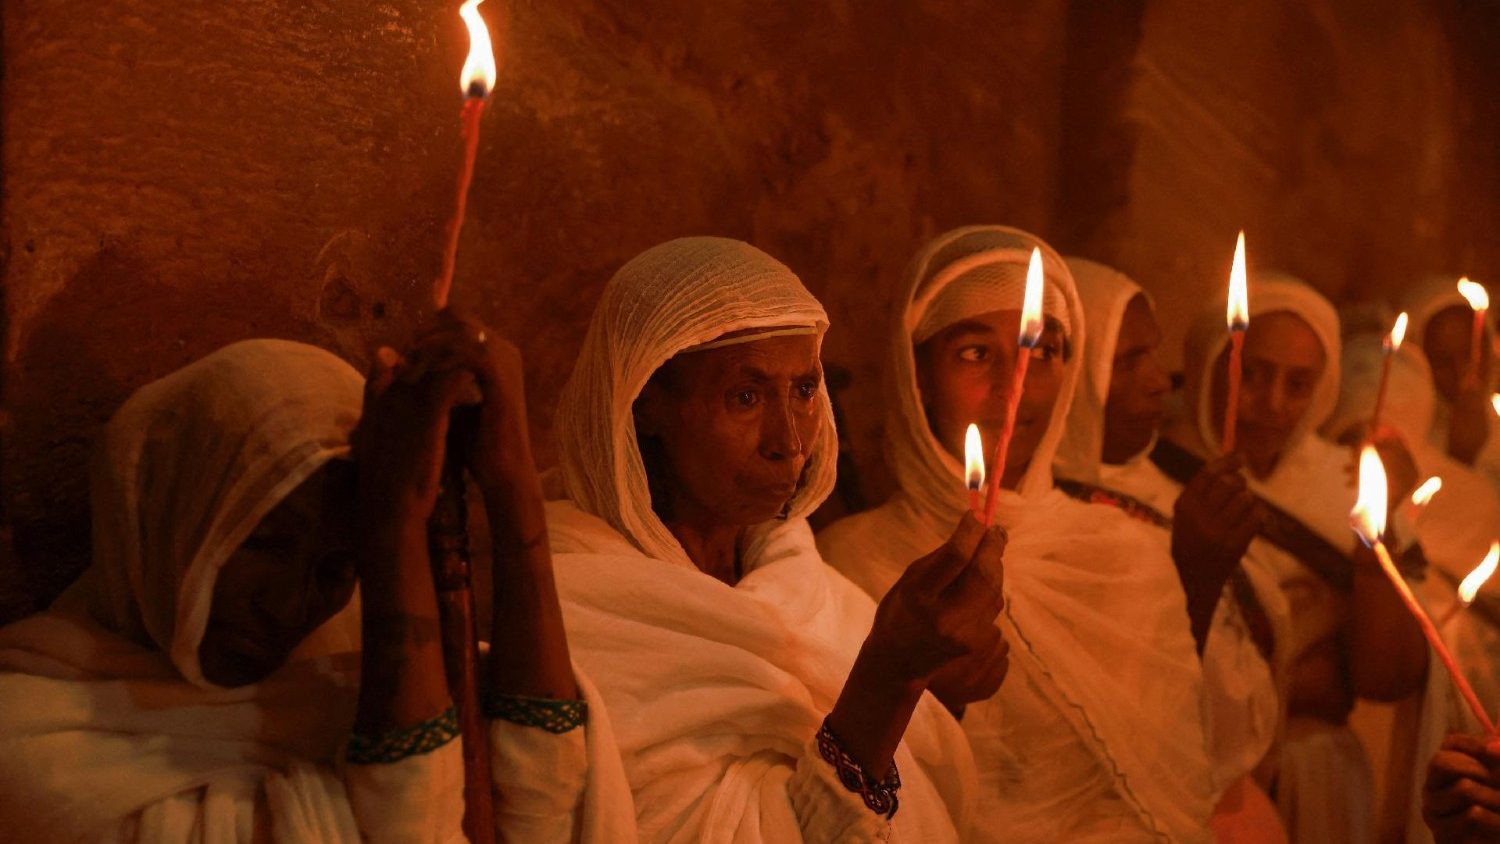 Ethiopian Bishop: Prayer and justice can heal our social divisions